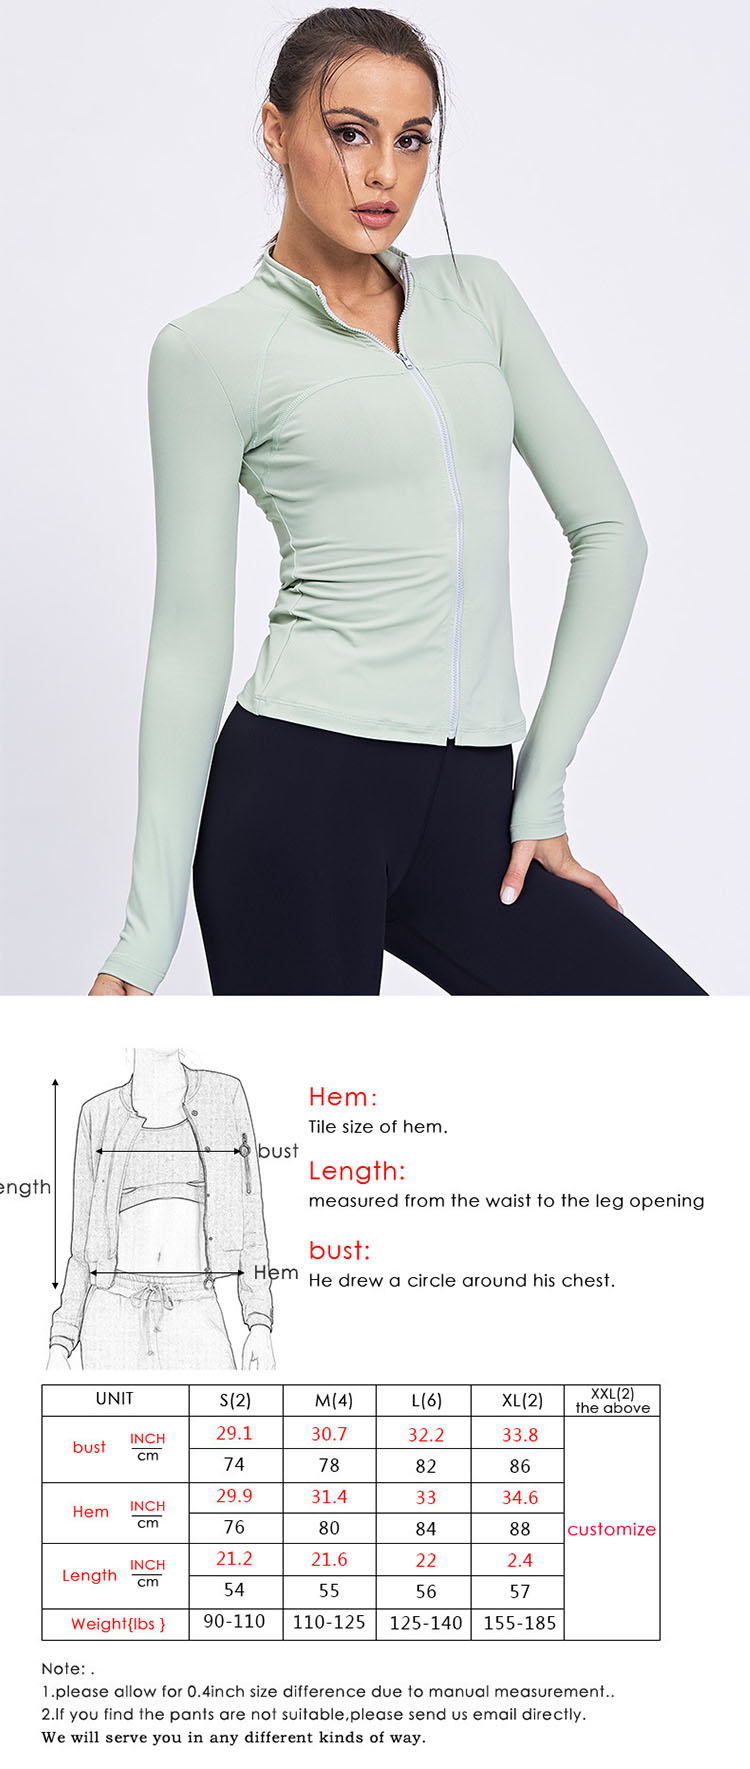 Zipper design, easy to put on and take off, the neckline can be adjusted at any time according to the temperature.